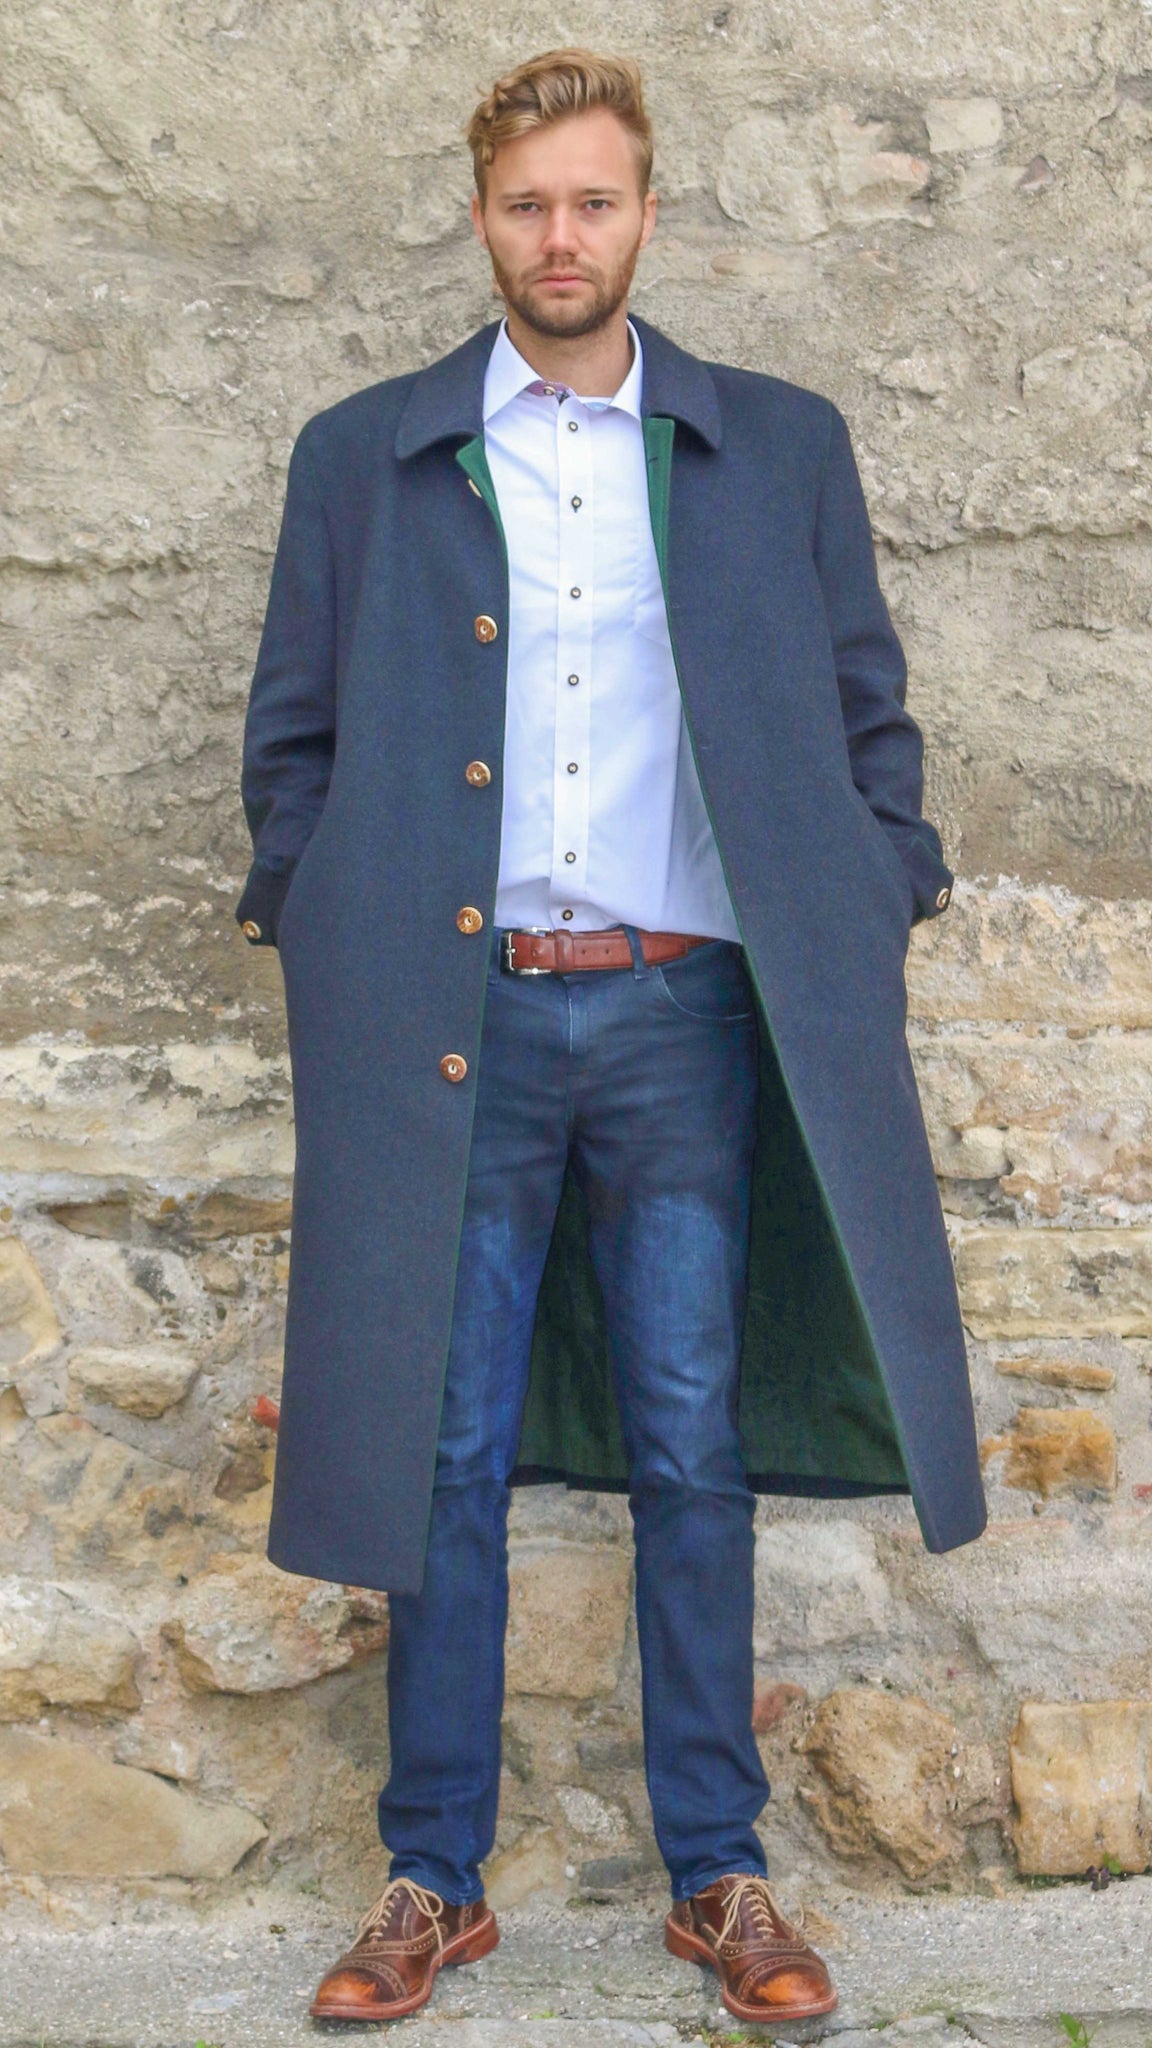 Loden Overcoat in Vienna, Austria made by Robert W. Stolz